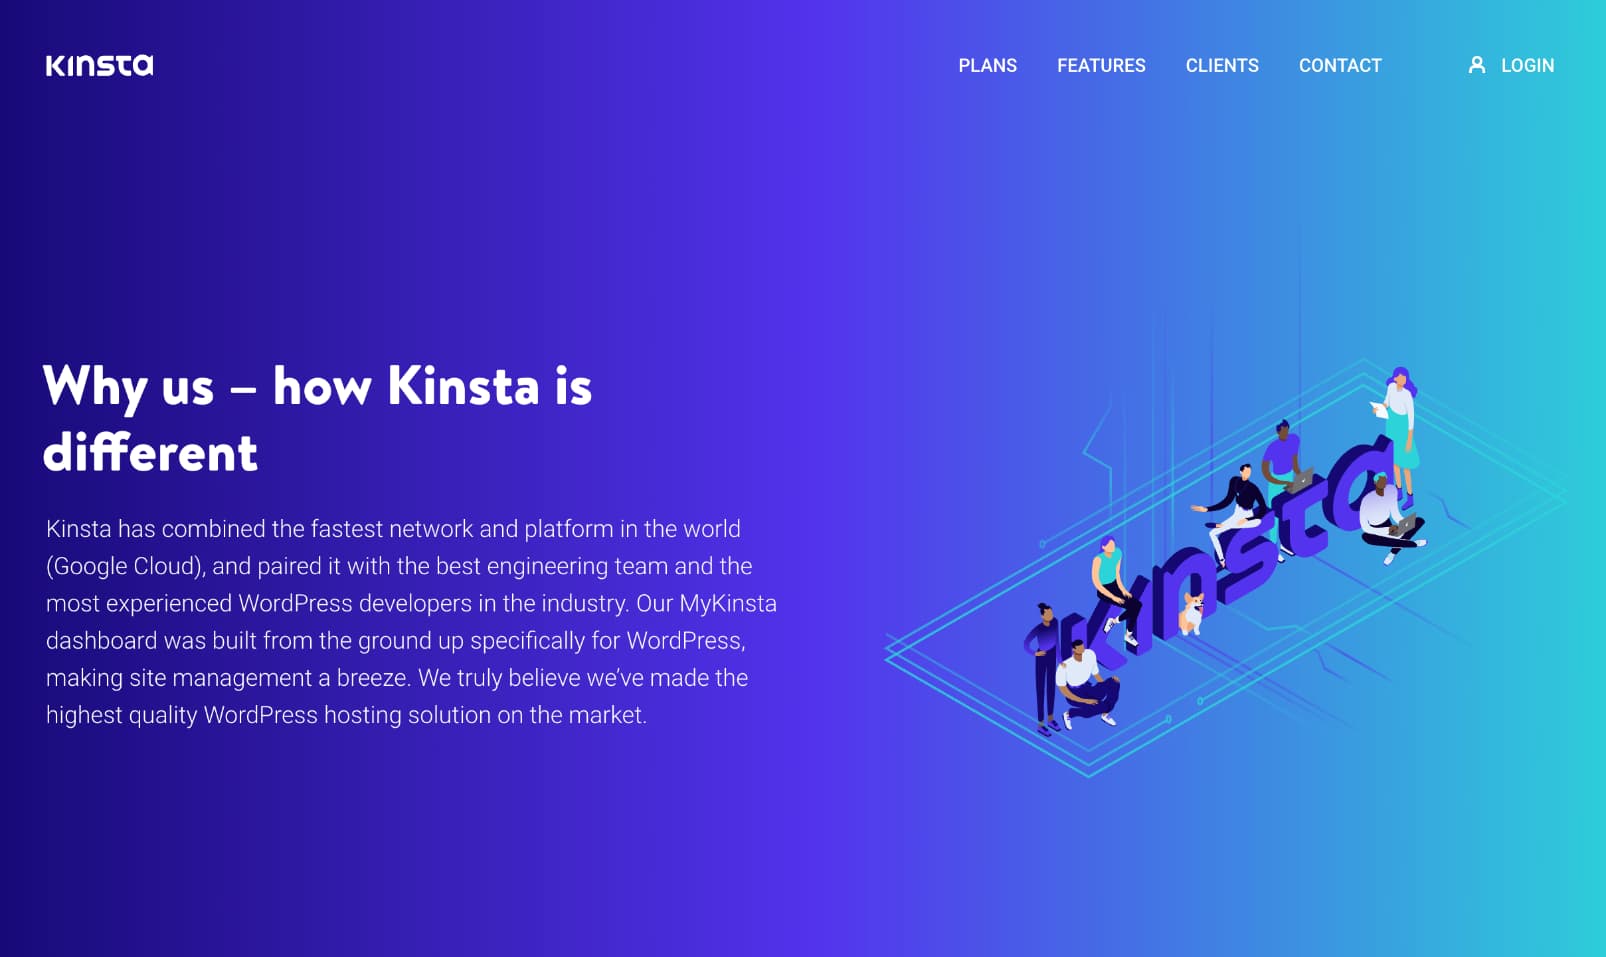 How Kinsta is Different